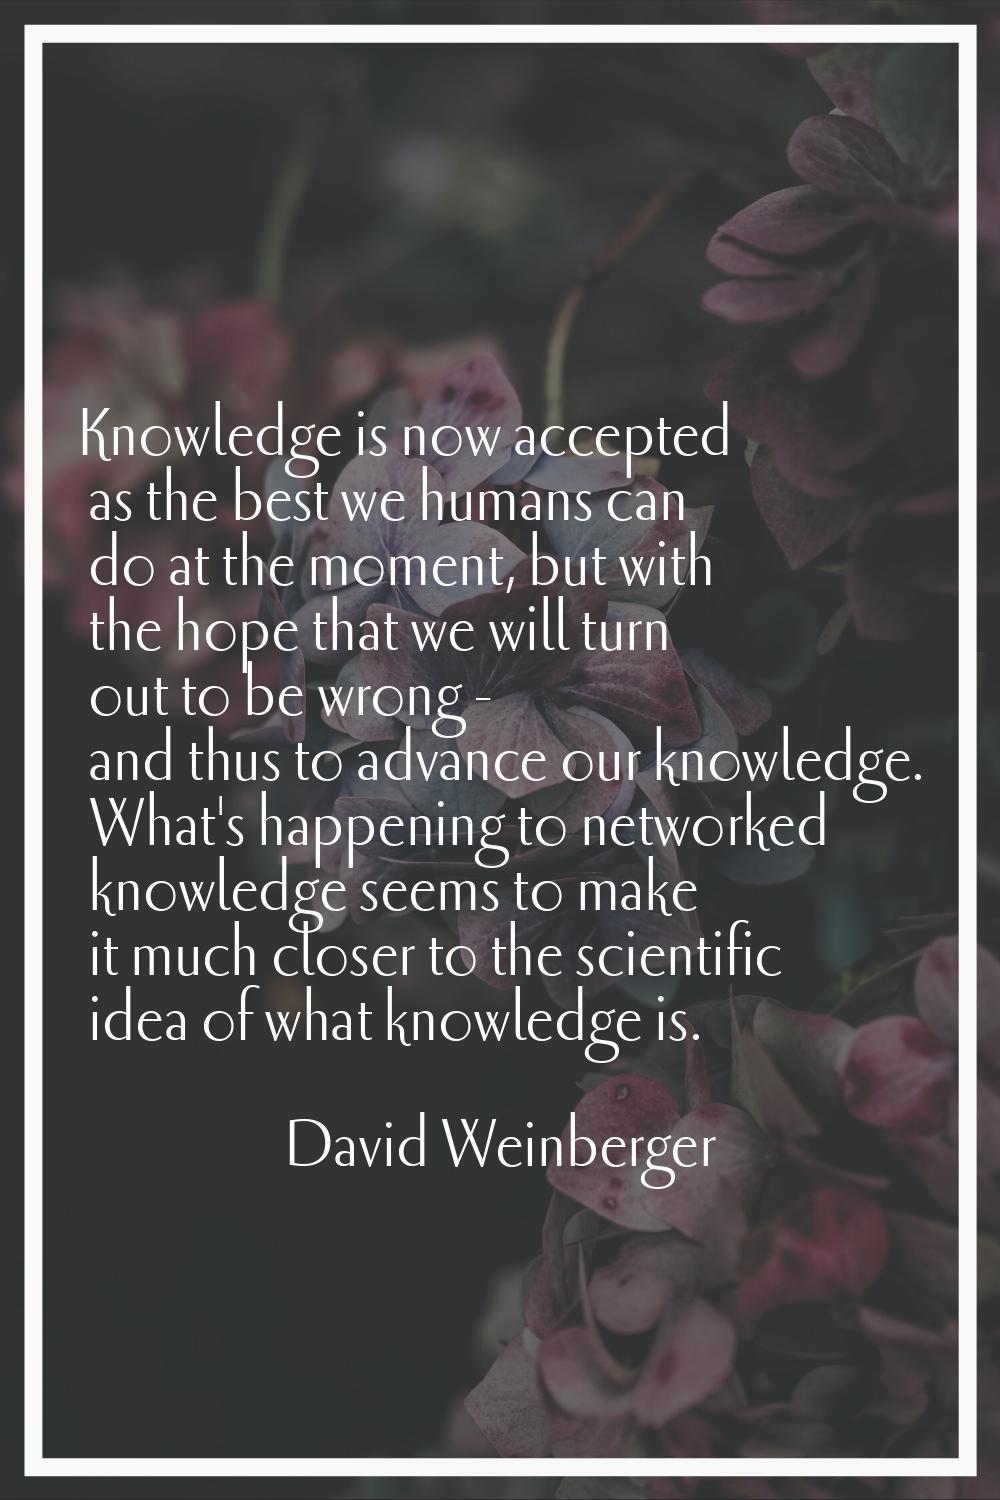 Knowledge is now accepted as the best we humans can do at the moment, but with the hope that we wil